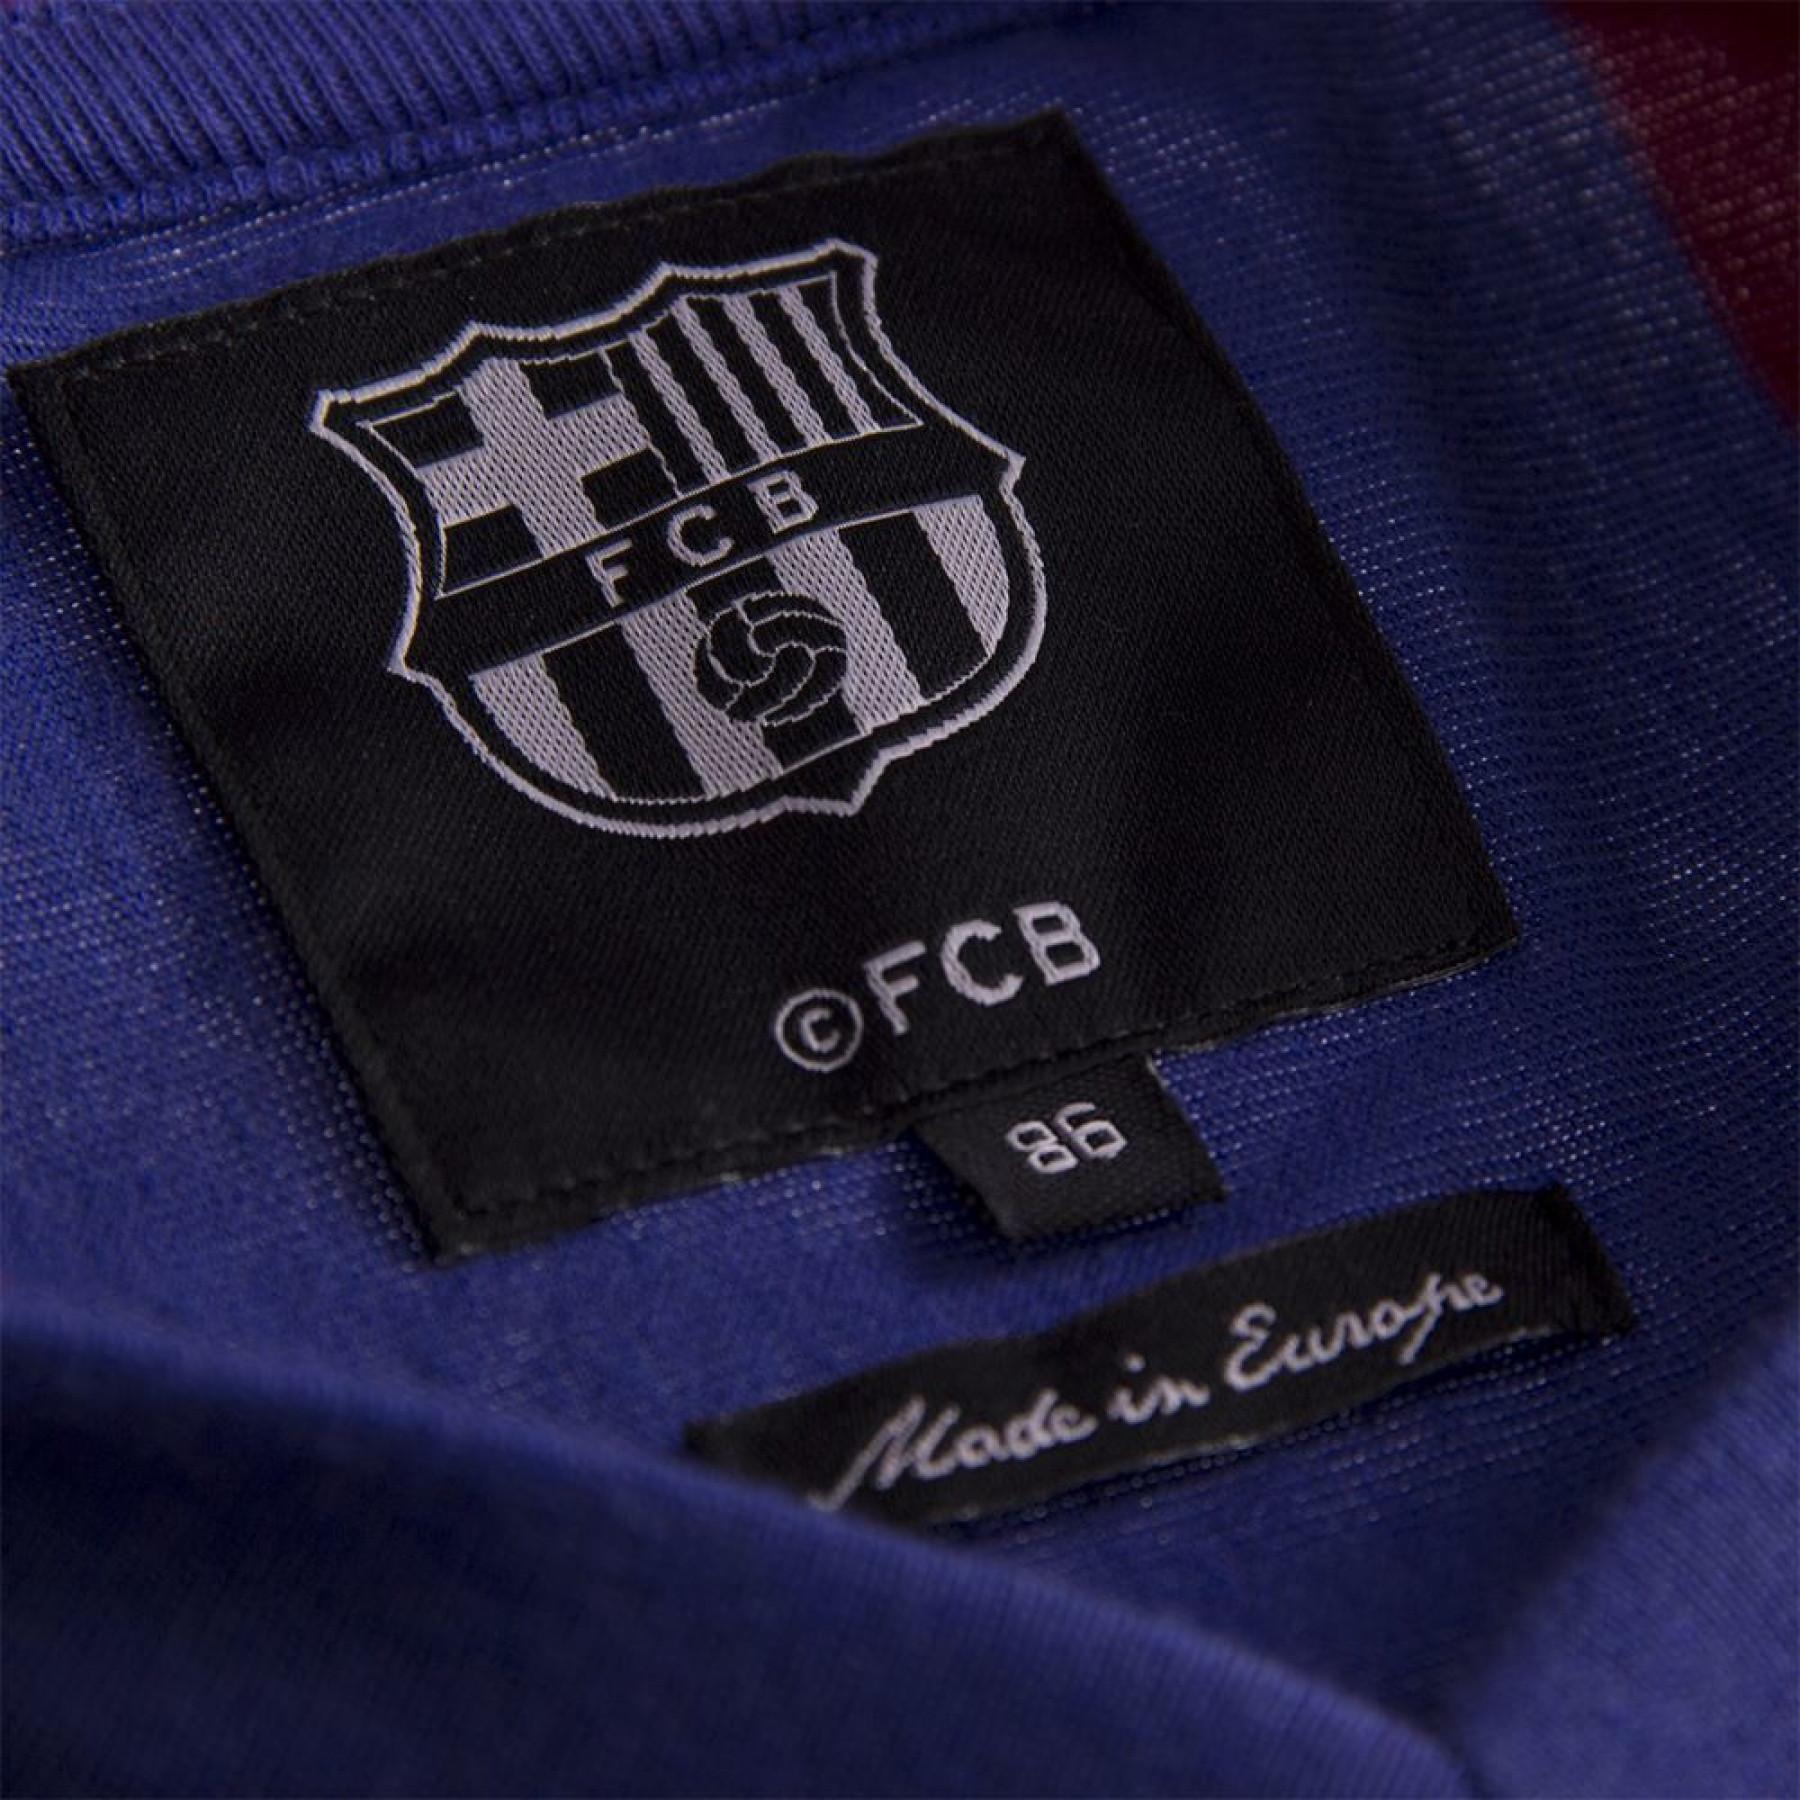 Maillot Domicile manches longues baby FC Barcelone